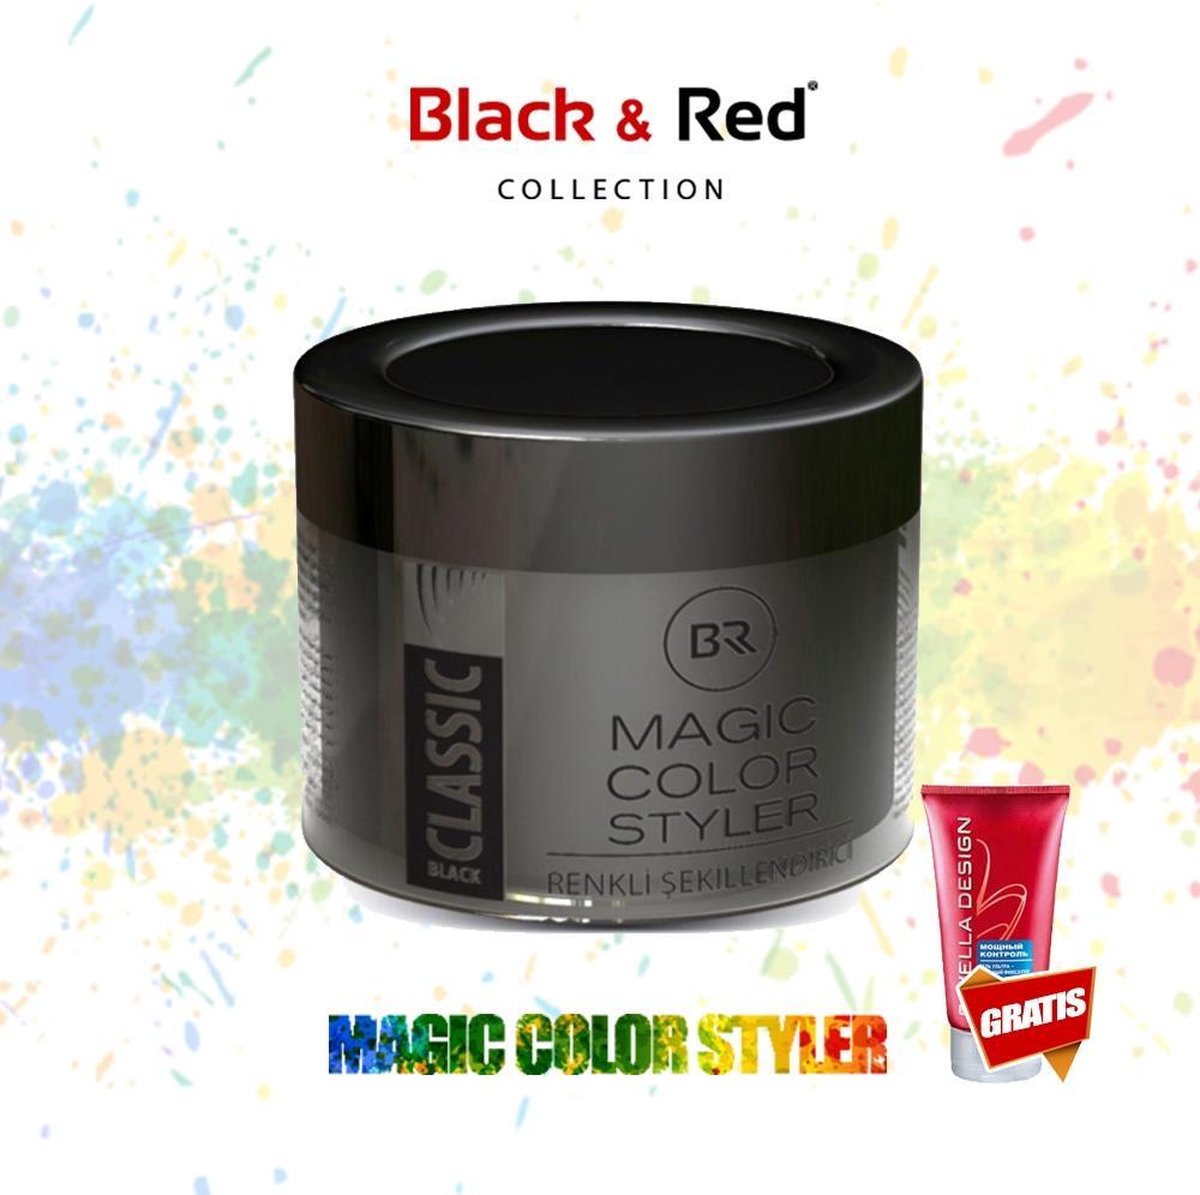 Black&Red Collection Magic Color Styler Haar Wax 100ml - Black Classic